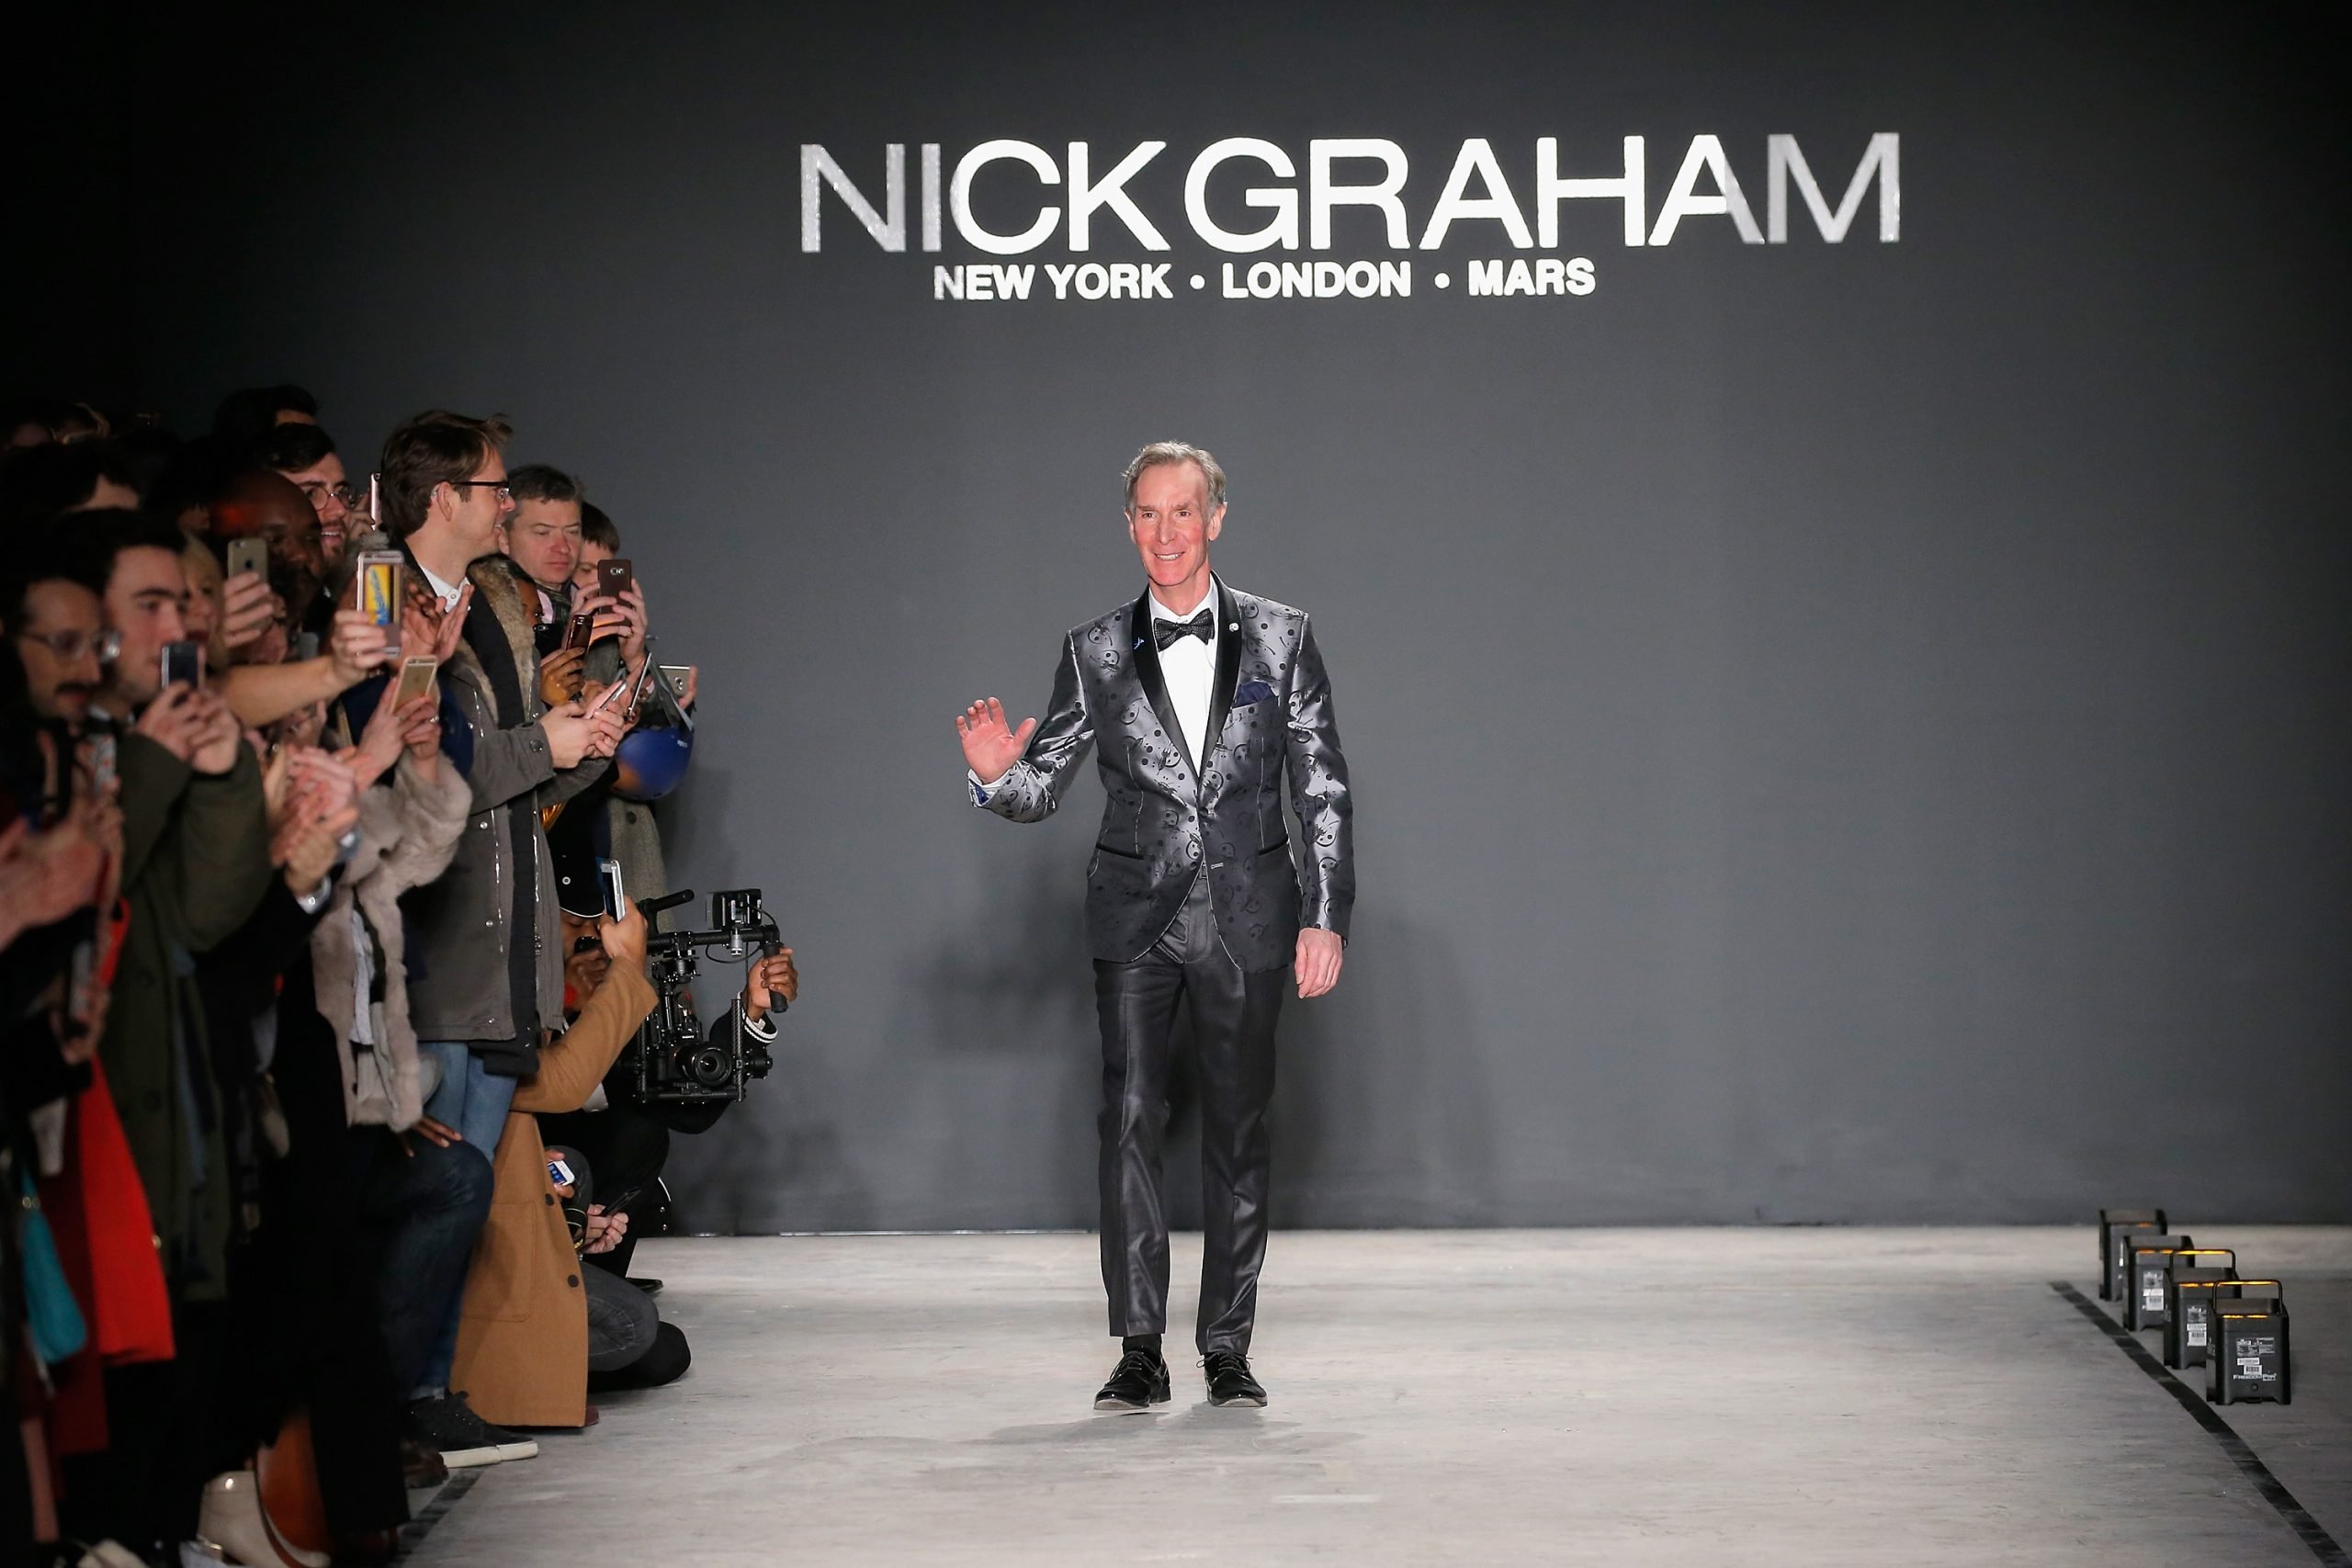 Designer Nick Graham on a Runway before launching his NFT Collection